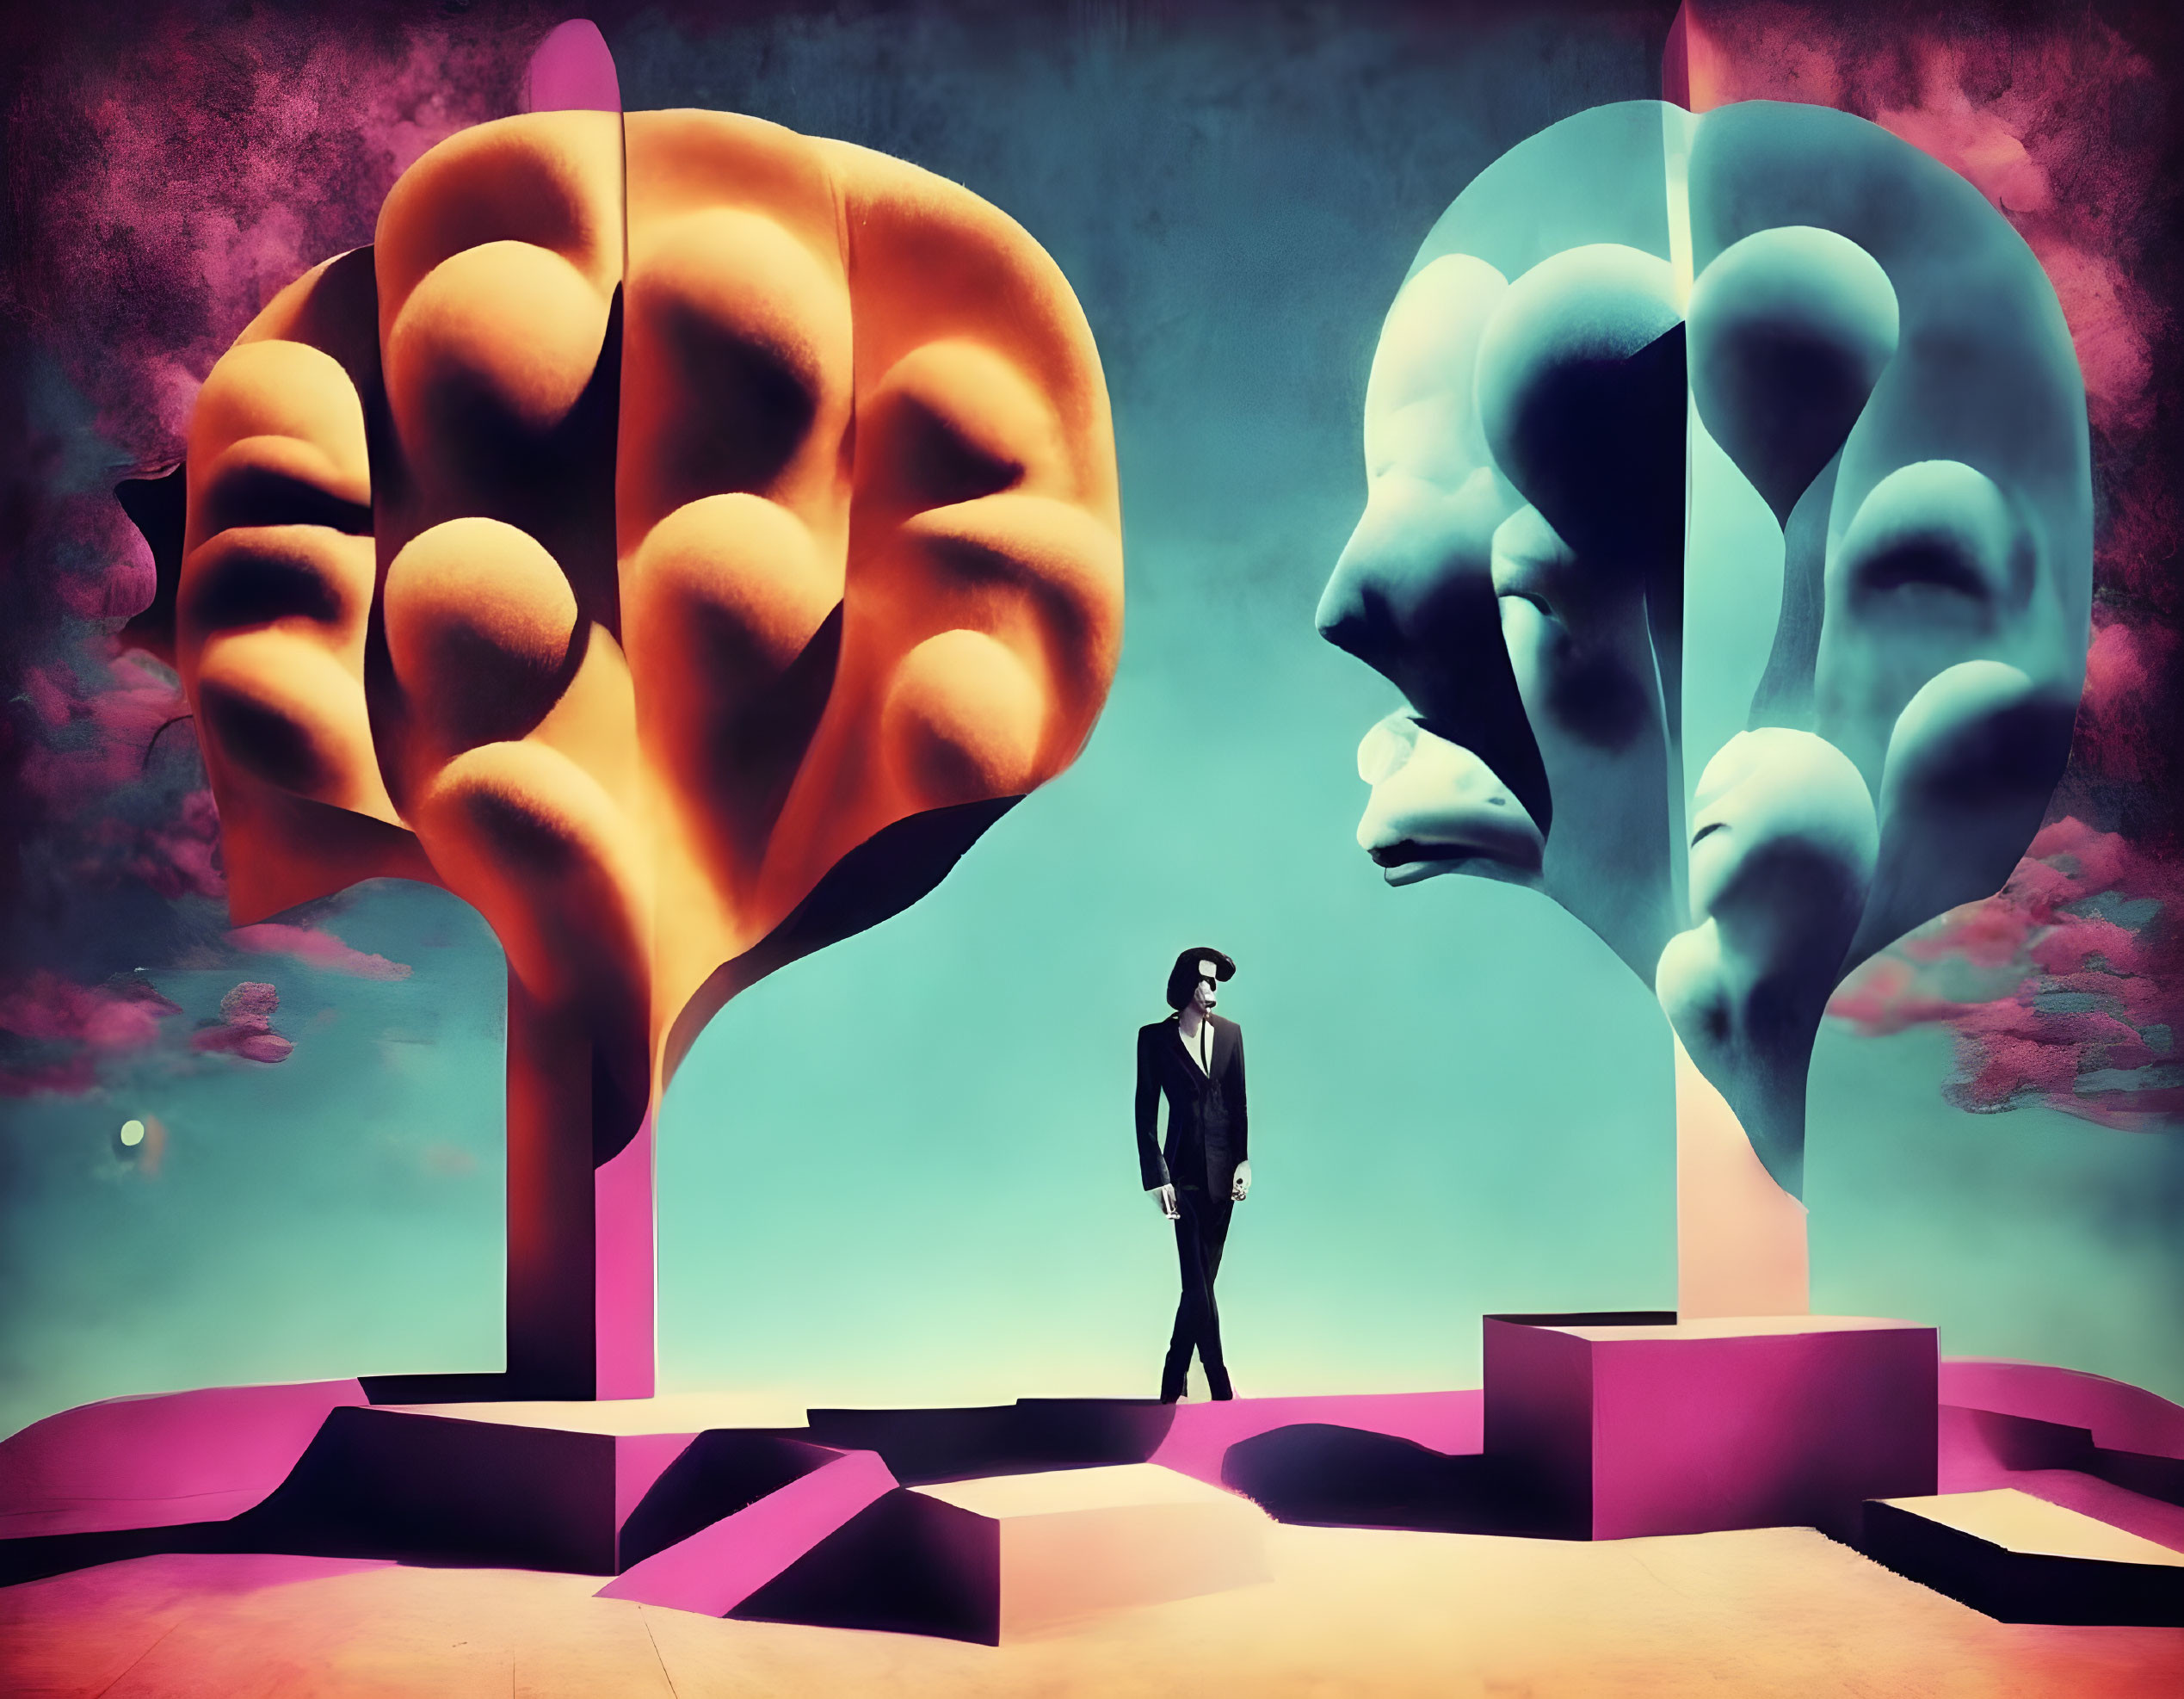 Man in suit between brain-shaped trees in surreal setting